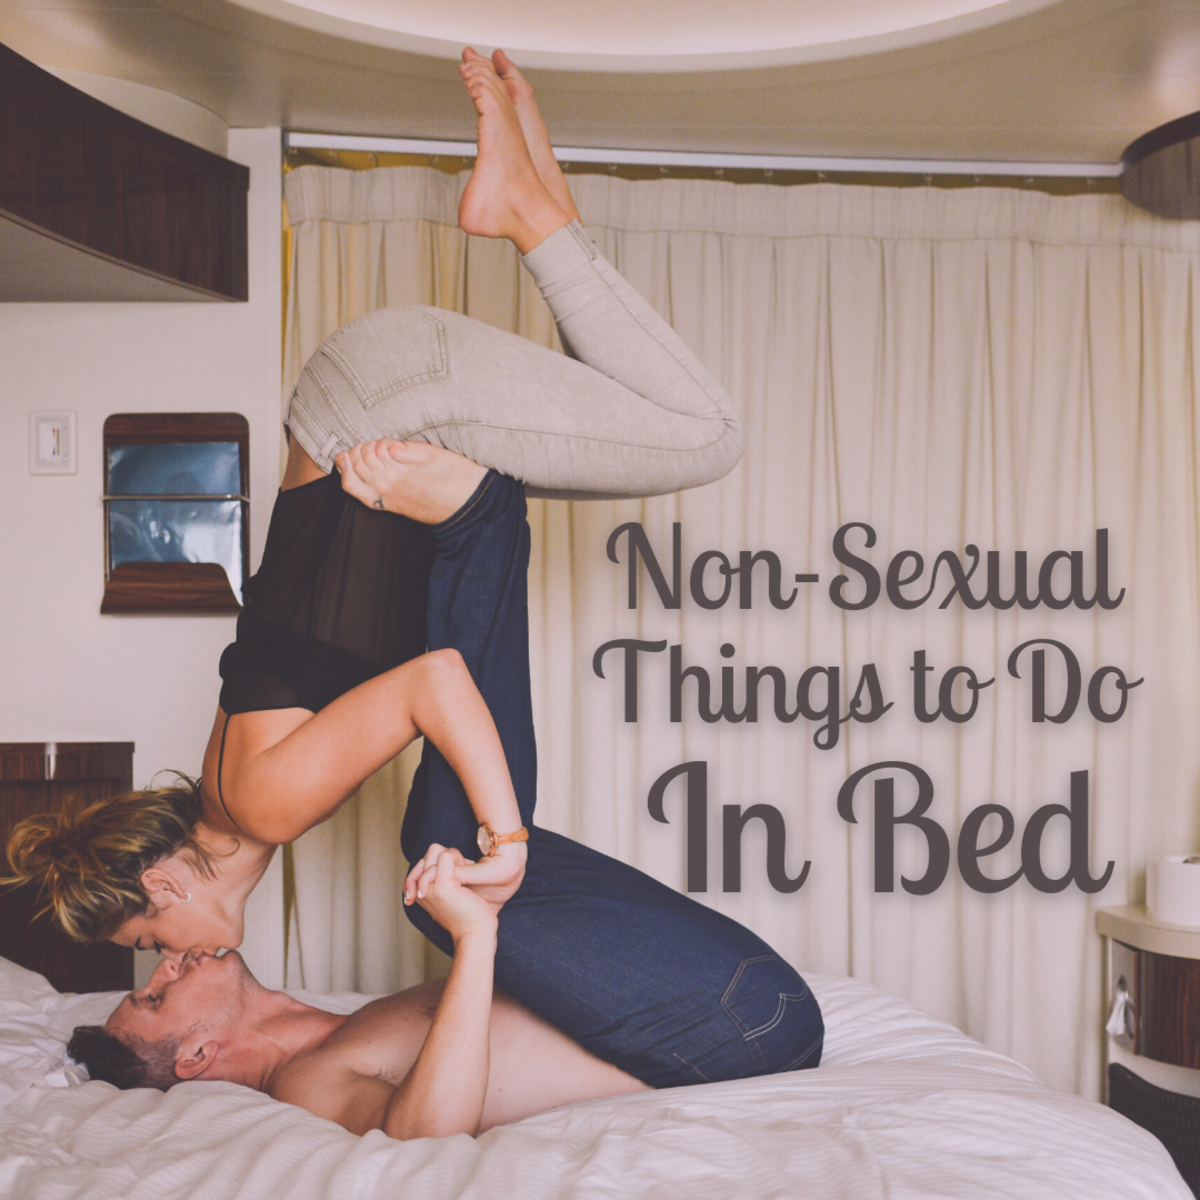 What are some things you can do in bed besides having sex?